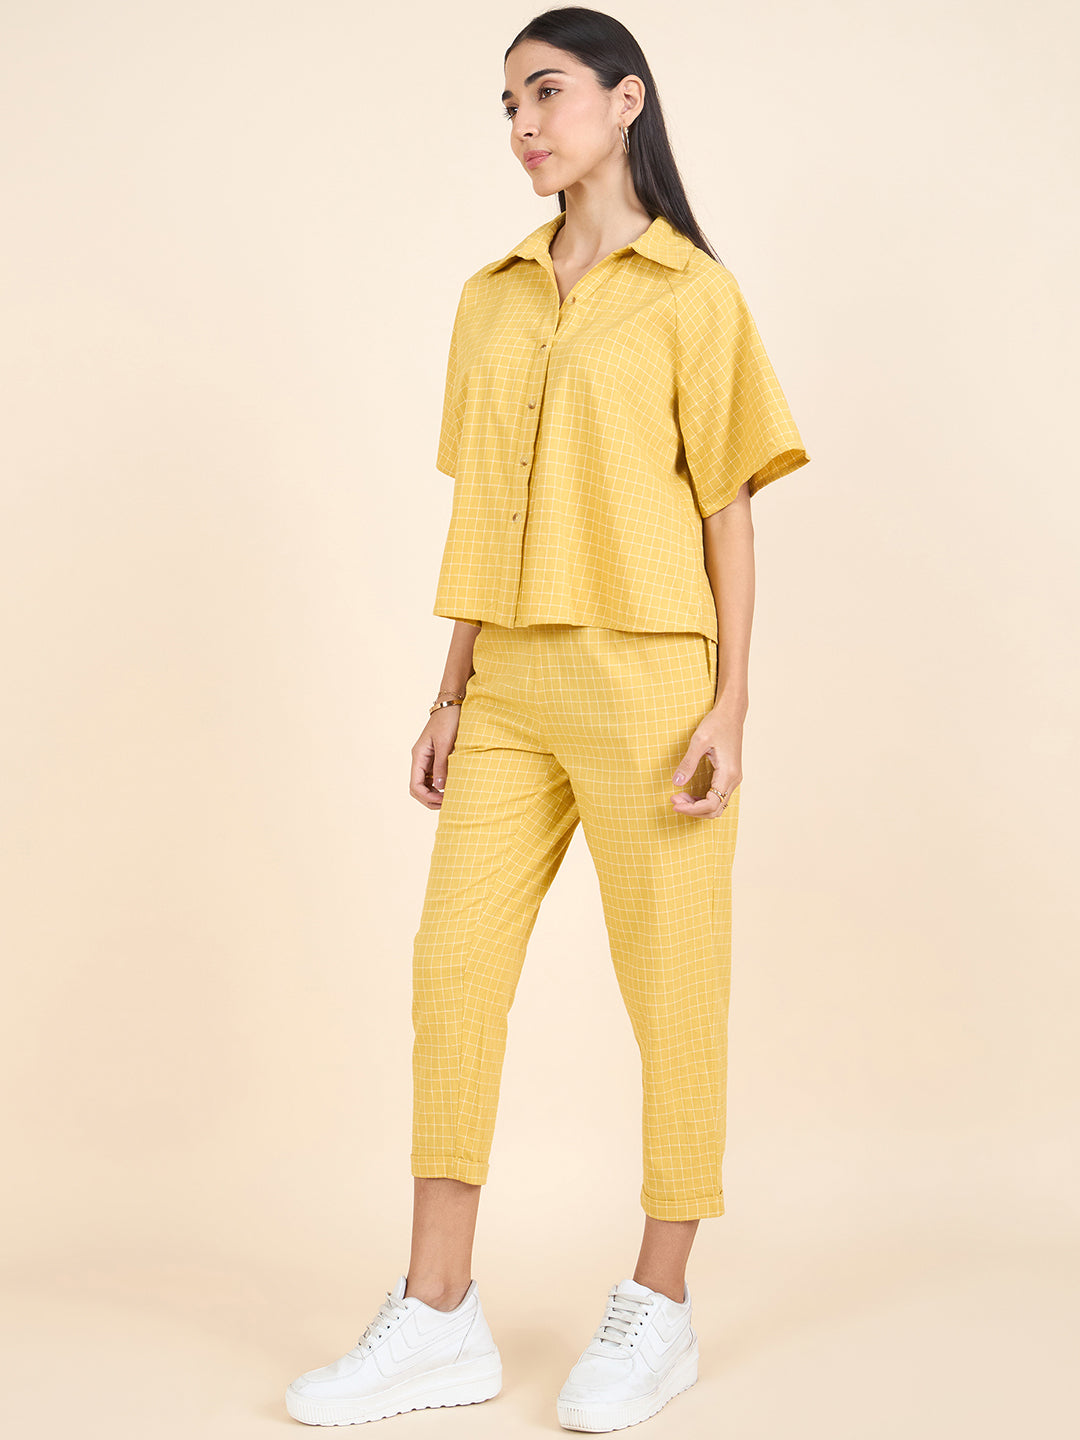 Gipsy Stylish Women co-ord set Summer Collection Yellow